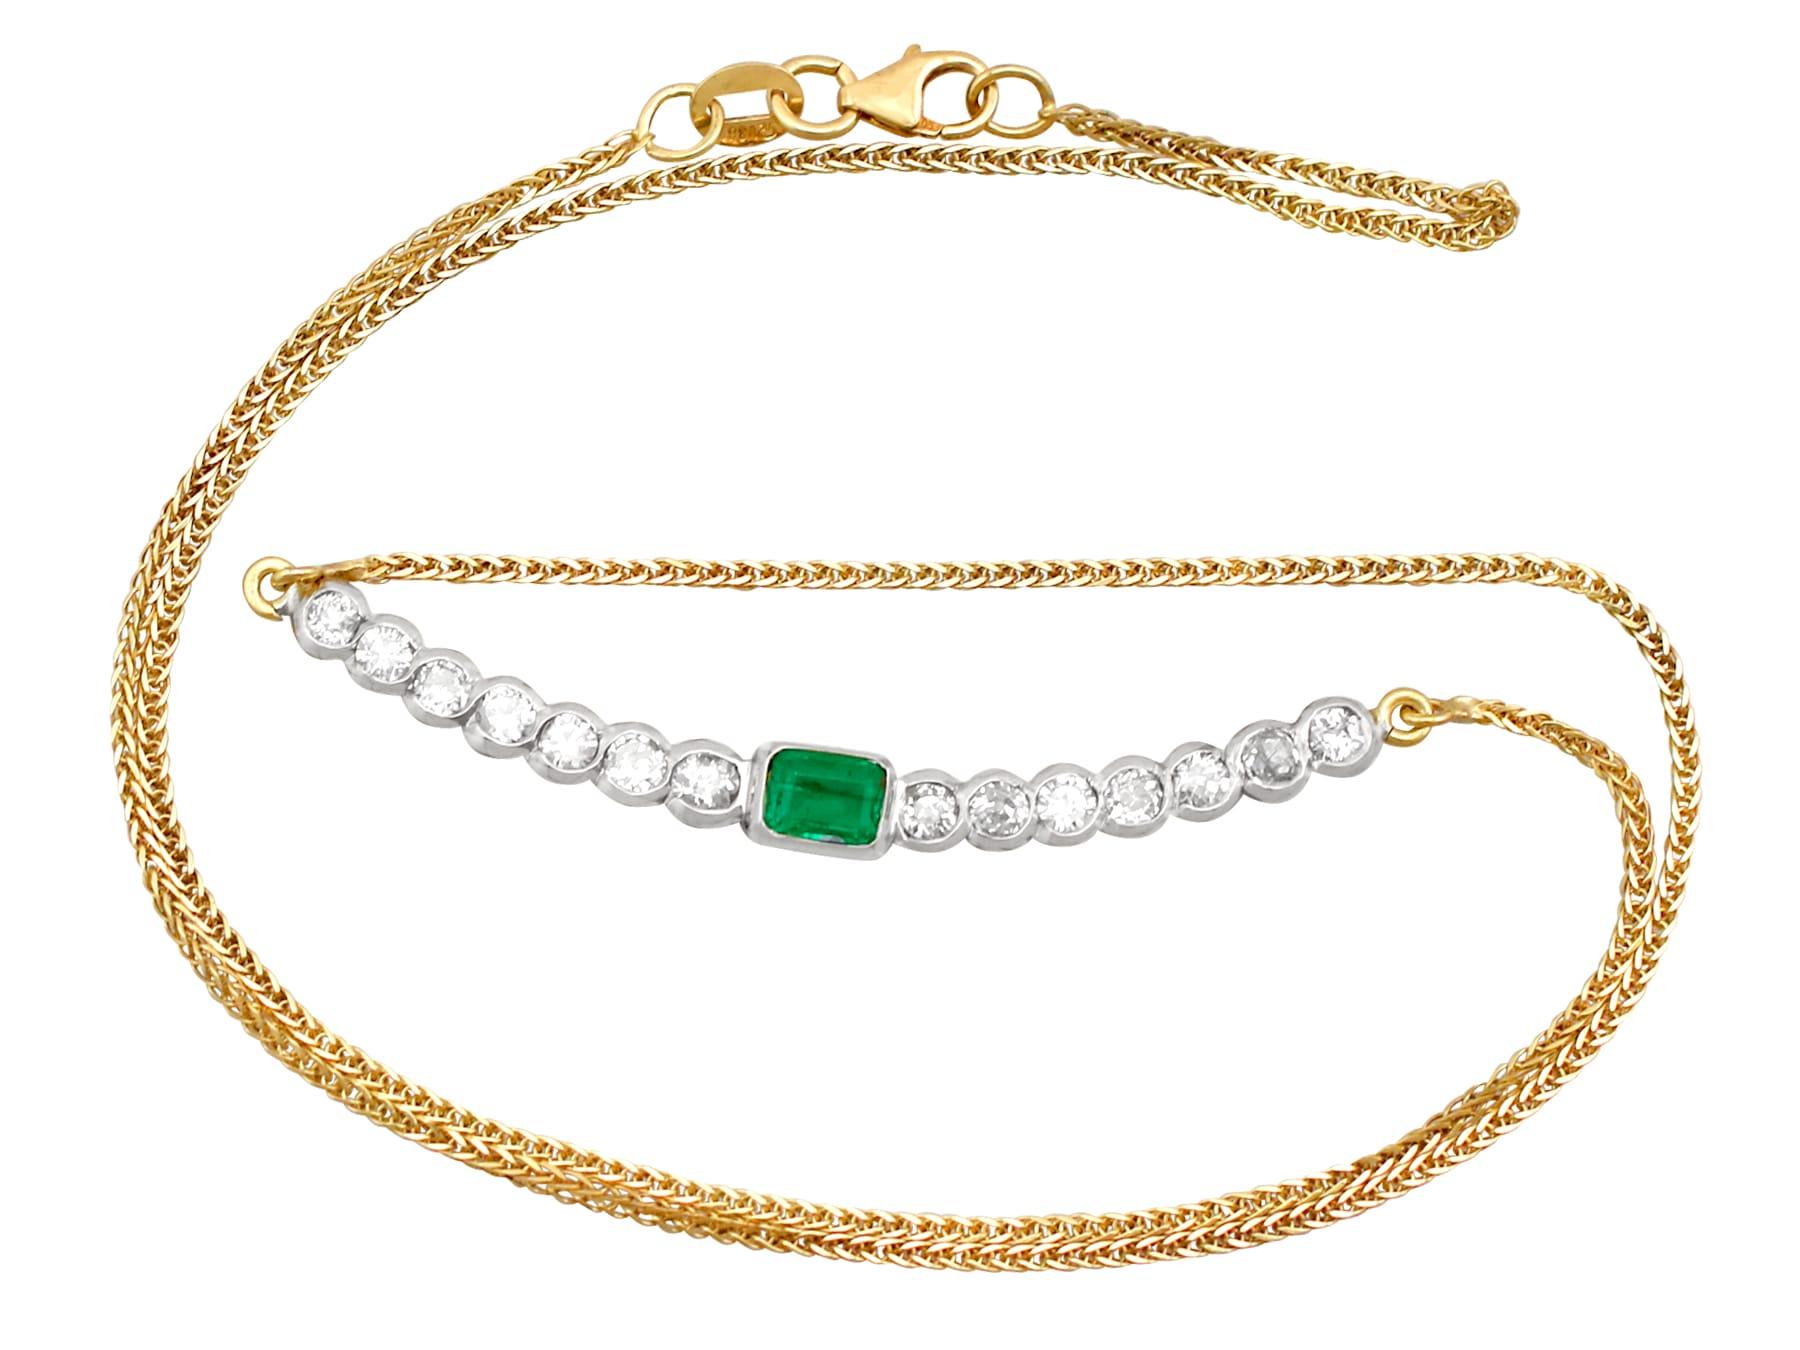 An impressive vintage 0.44 carat emerald and 1.54 carat diamond, 18 karat white and yellow gold necklace; part of our diverse gemstone jewelry collections.

This fine and impressive vintage emerald and diamond necklace has been crafted in 18k white